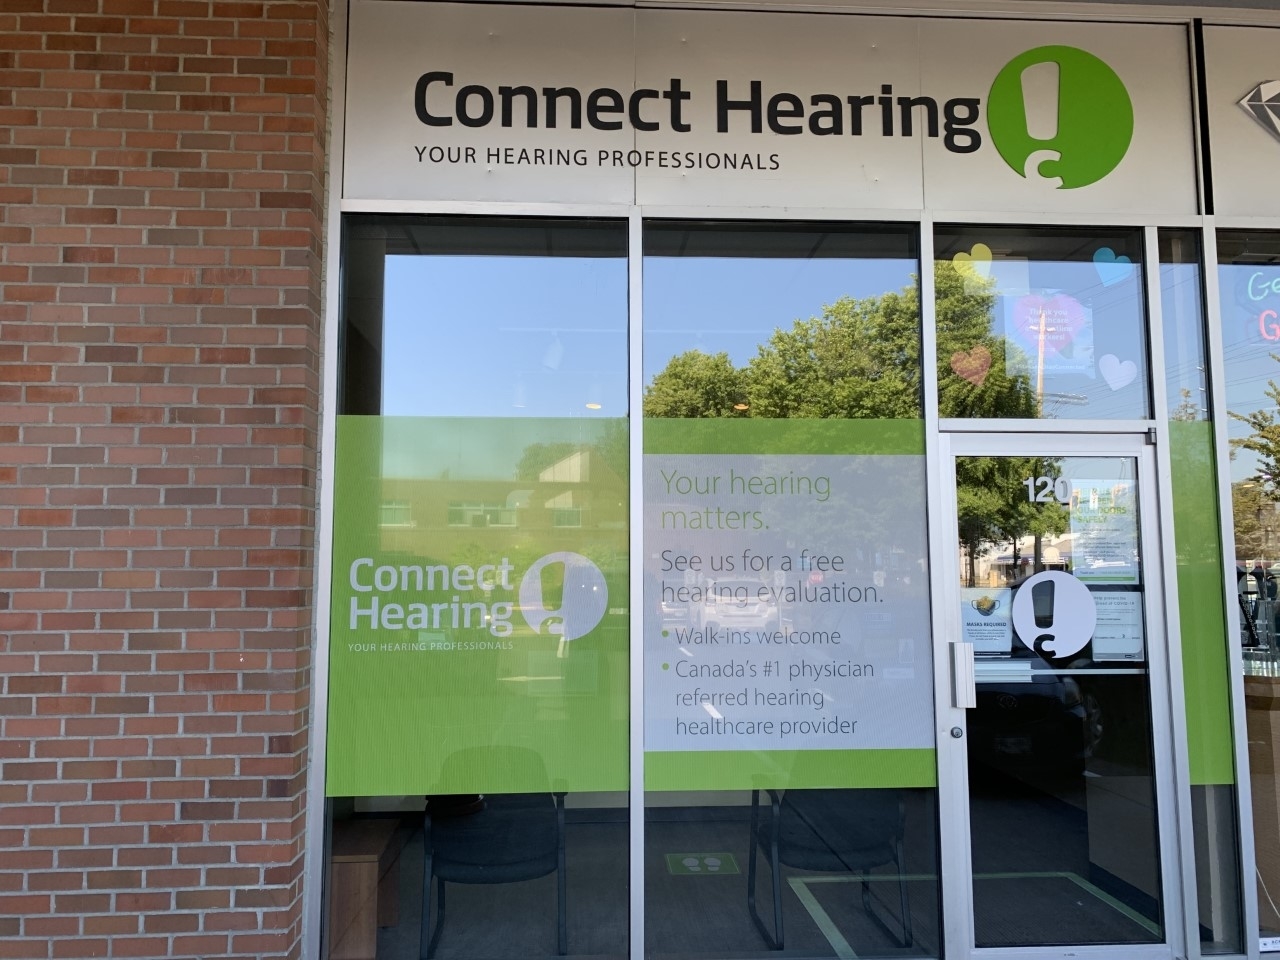 Connect Hearing - Hearing Aids